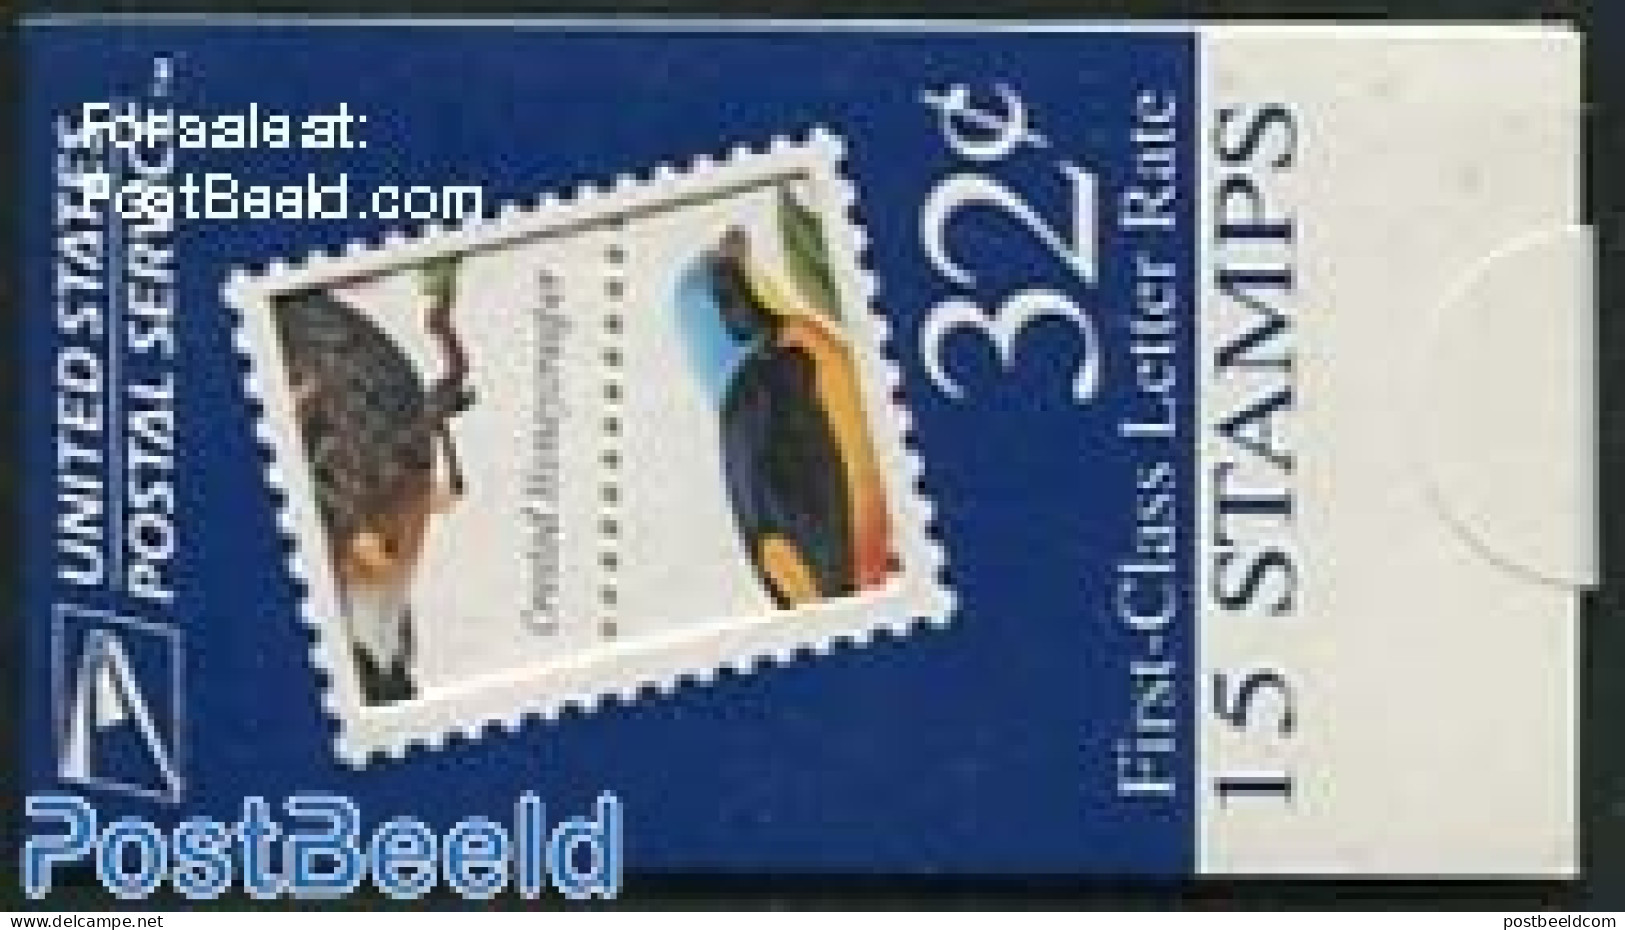 United States Of America 1998 Birds Booklet, Mint NH, Nature - Birds - Stamp Booklets - Unused Stamps